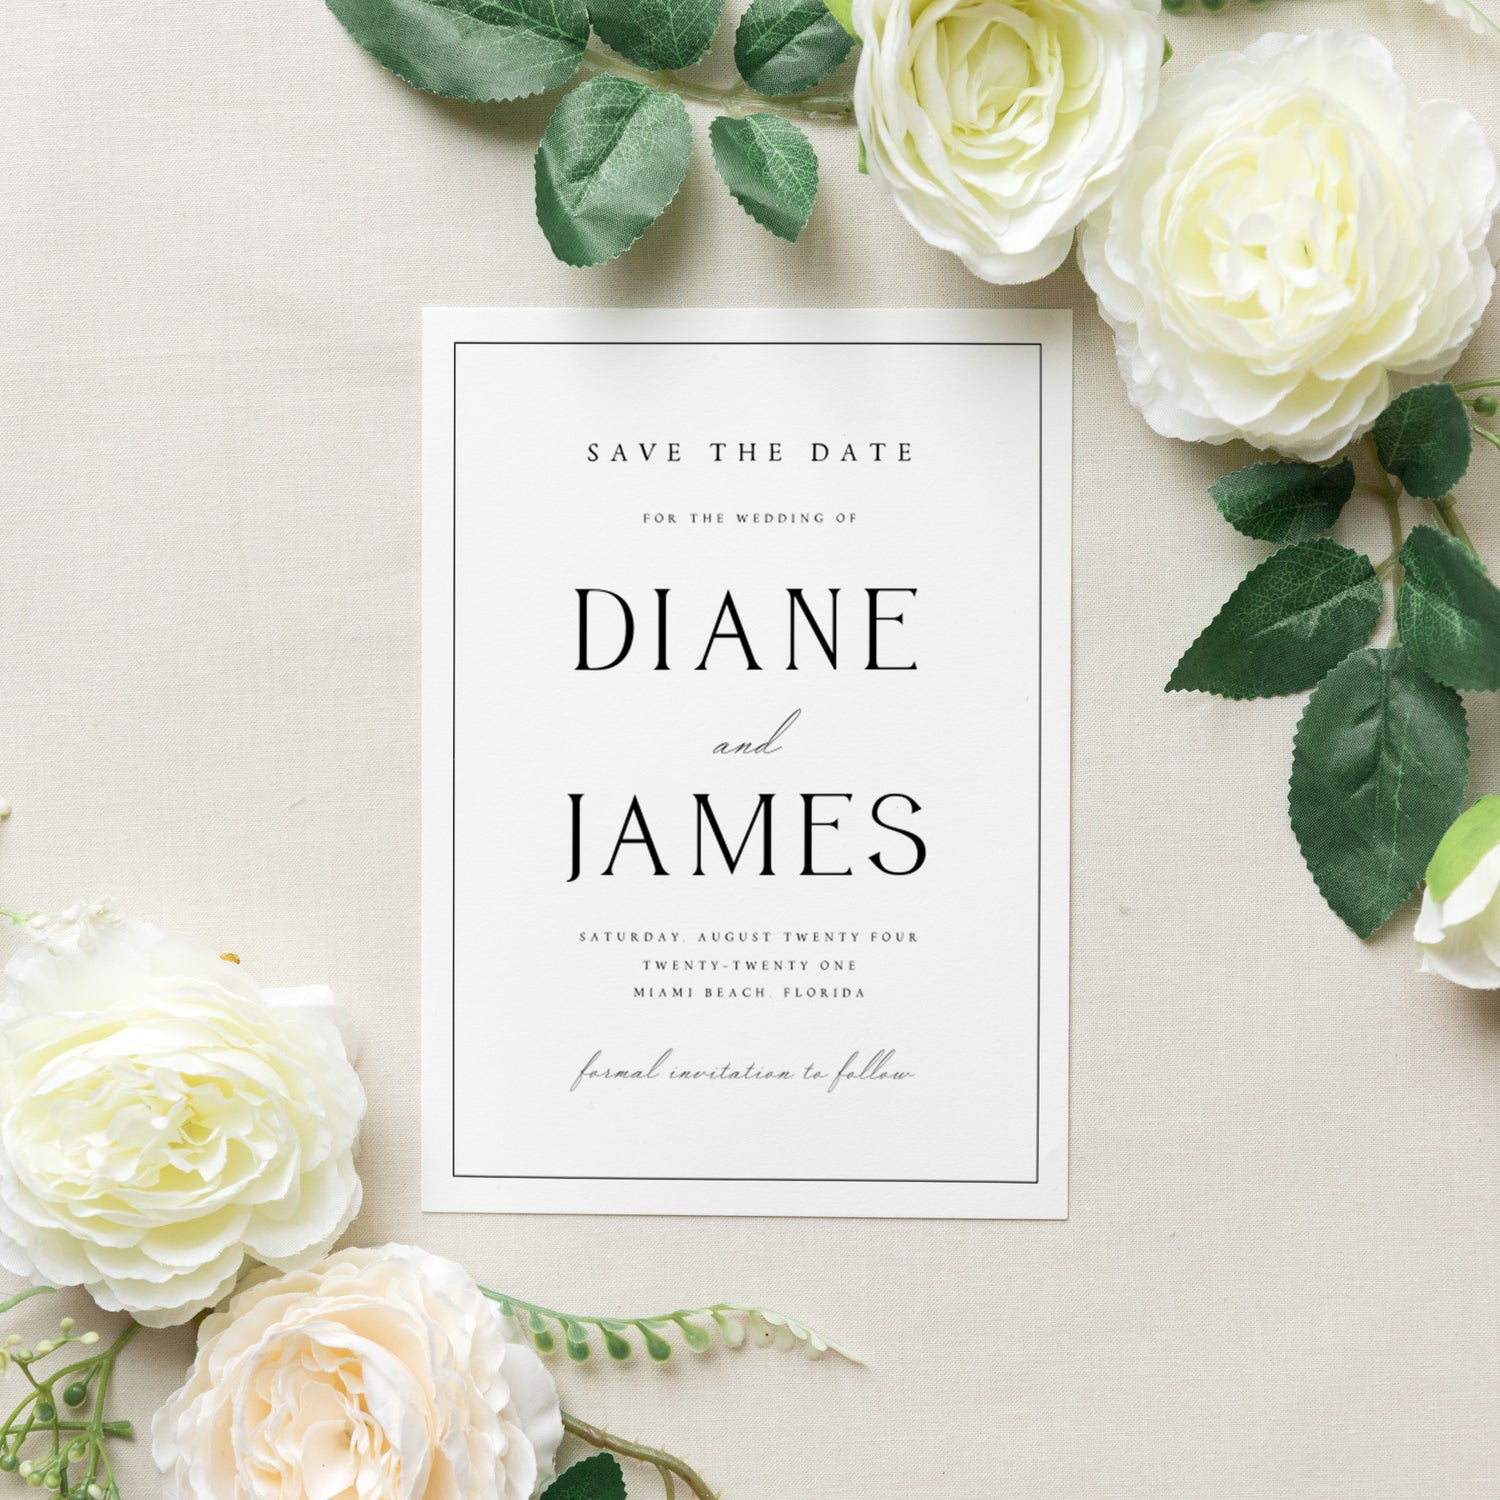 Diane Collection